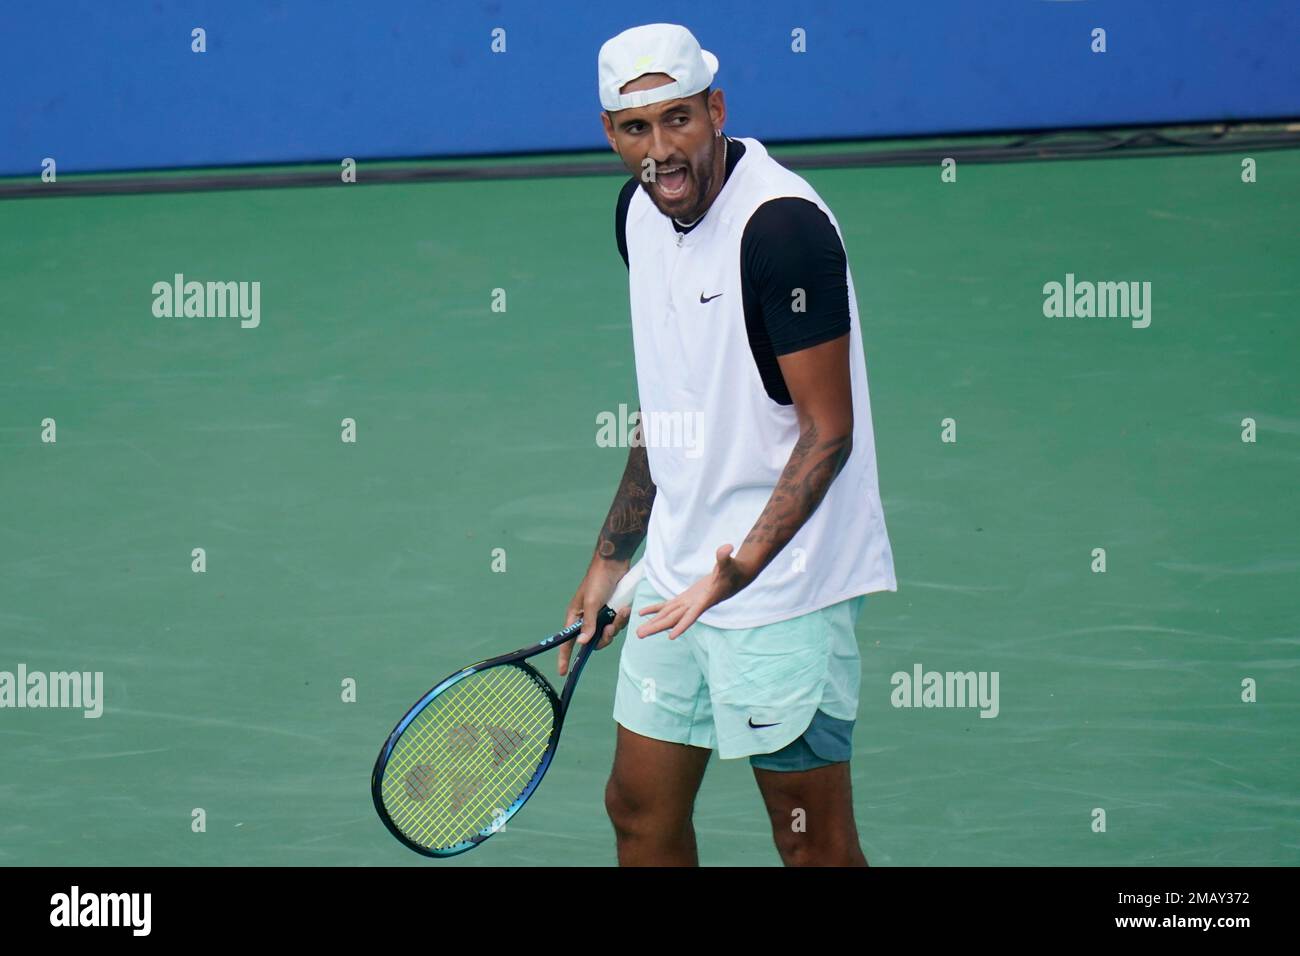 Nick Kyrgios, of Australia, reacts during a match against Reilly Opelka, of the United States, during a match at the Citi Open tennis tournament in Washington, Friday, Aug